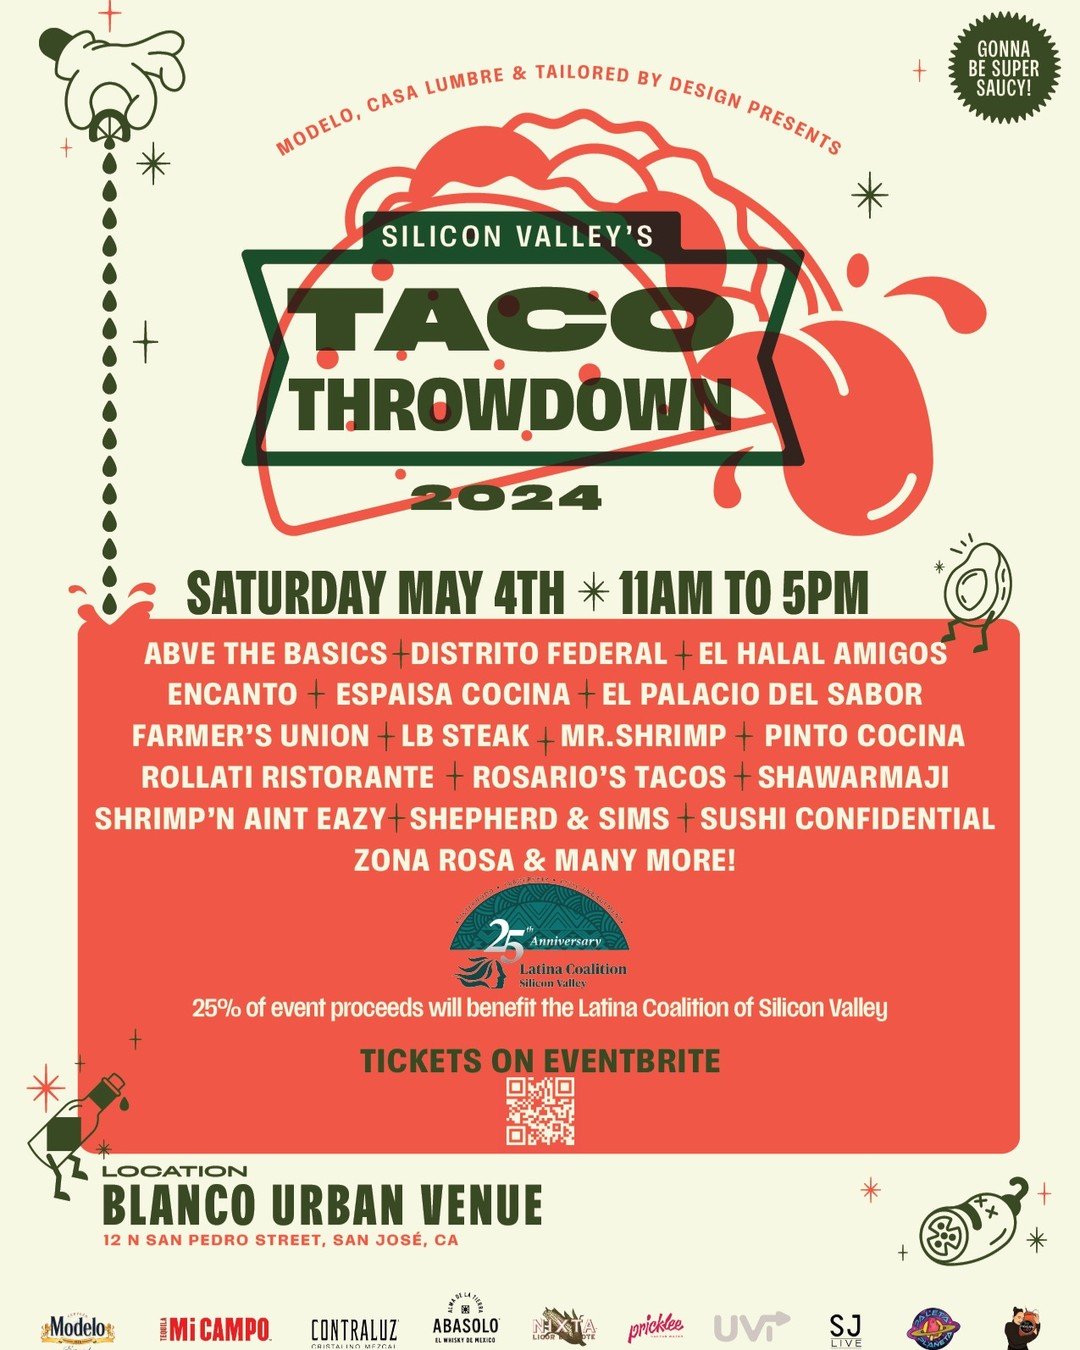 🌮🔥 TBD Presents: The Silicon Valley Taco Throwdown 🔥🌮

Hola amigxs! Join us for a sizzling event celebrating Latina Coalition of Silicon Valley's 25th Anniversary! Enjoy tasty tacos, support our mission, and have a blast!

🗓️ Sat, May 4th, 11am 